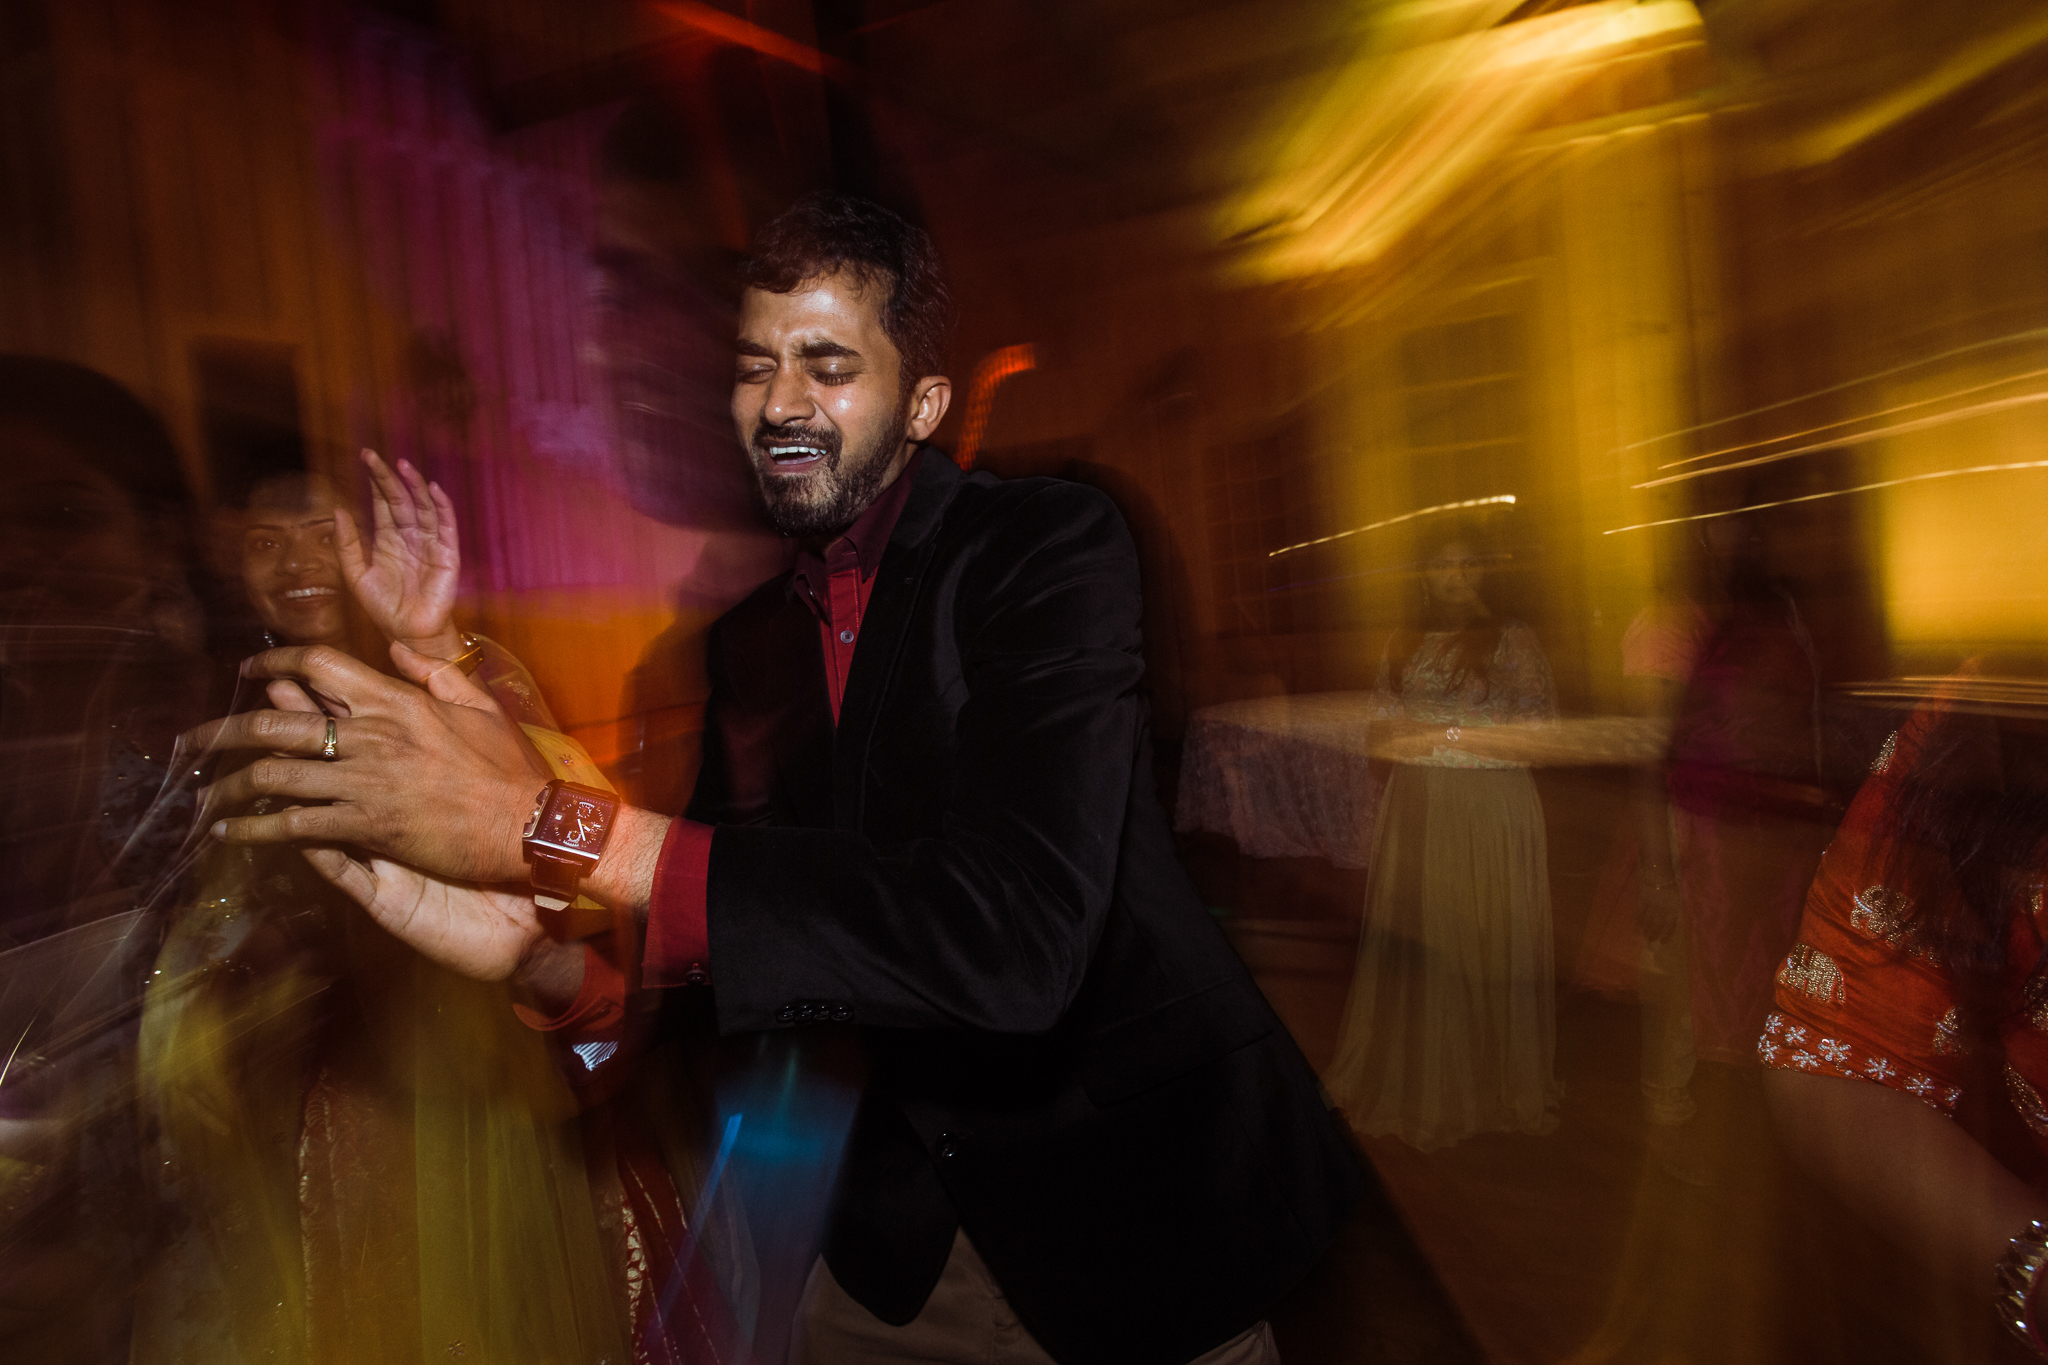 Keerthi and Kishore - Indian Wedding - elizalde photography - Dallas Photographer - South Asian Wedding Photographer - The SPRINGS Event Venue (206 of 226).jpg